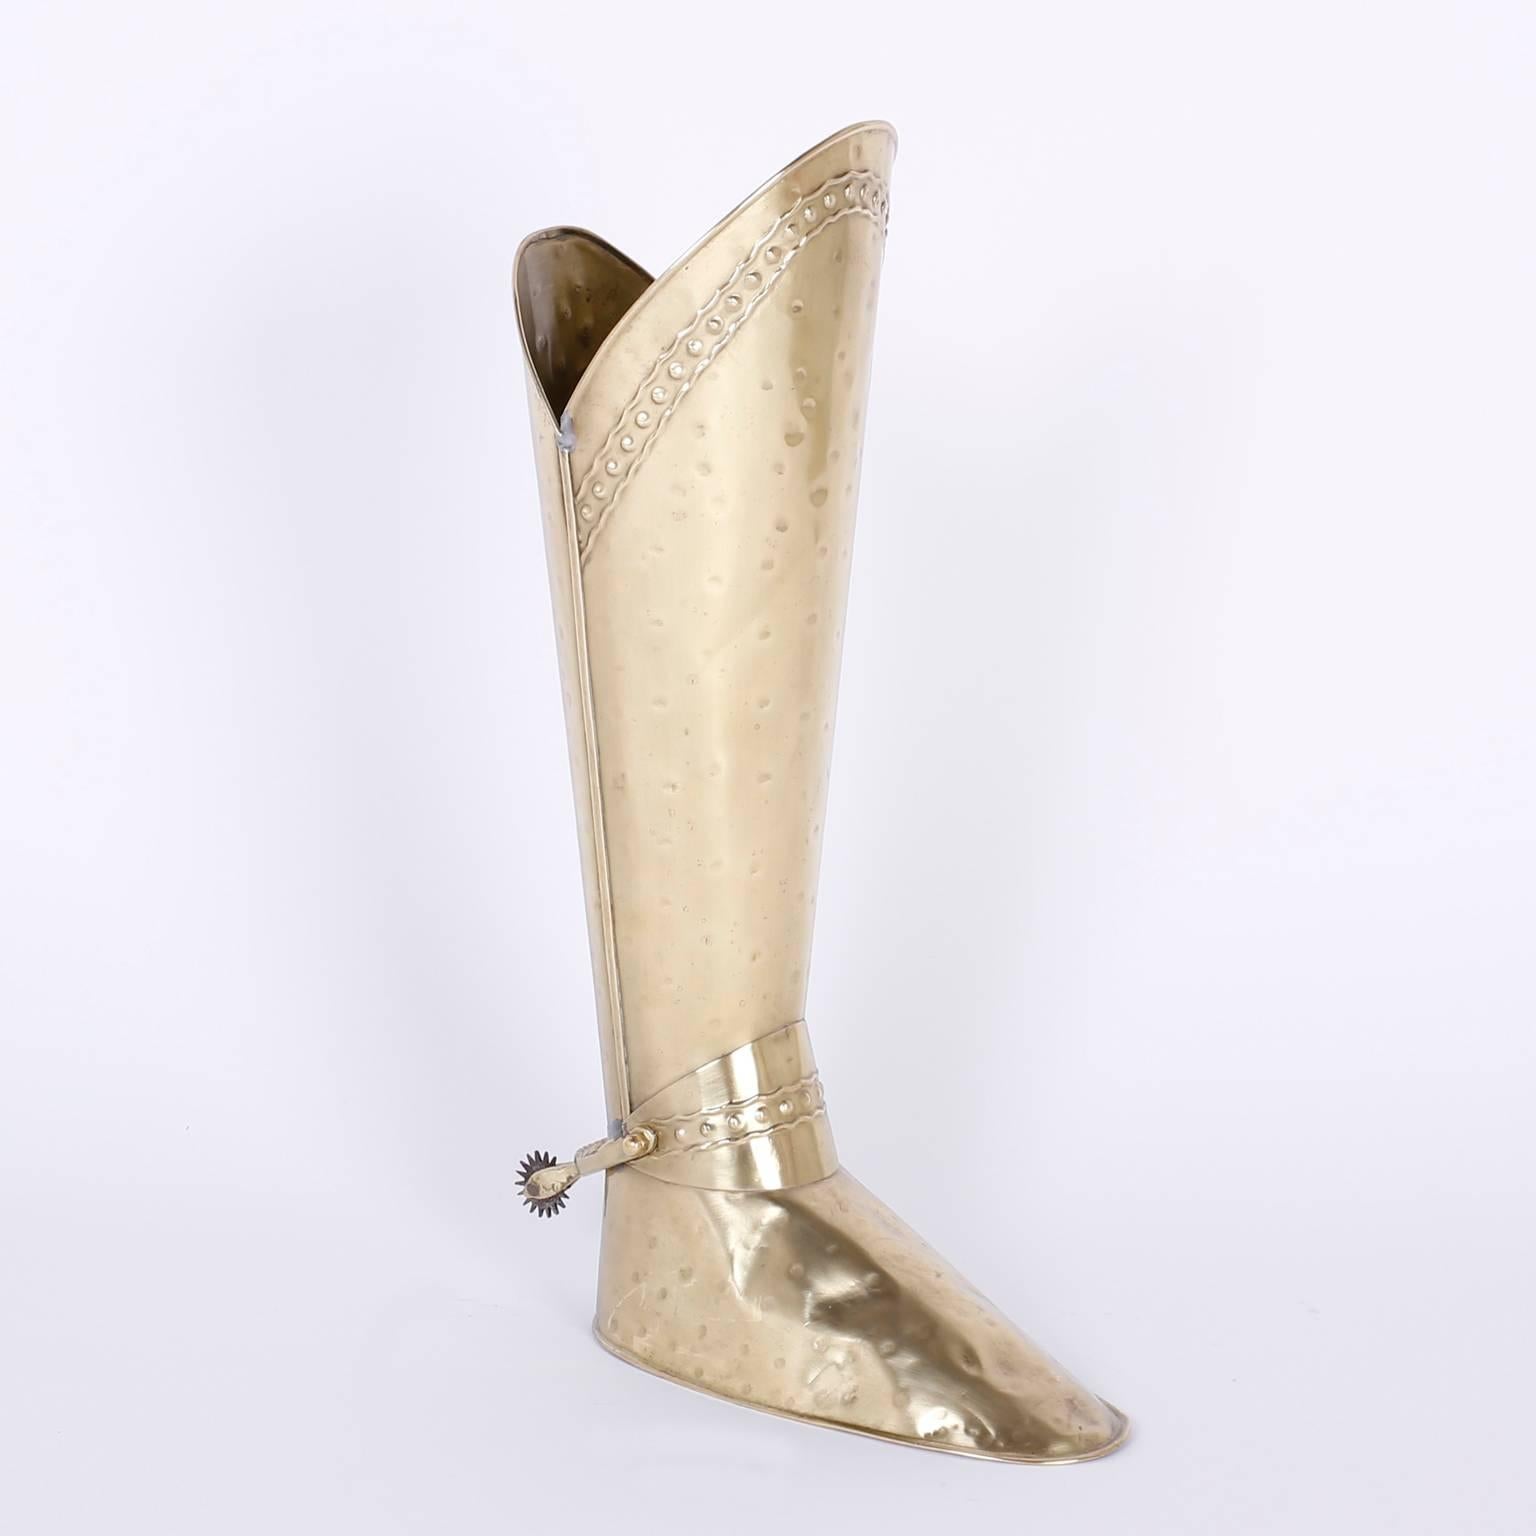 Fanciful hand-hammered brass umbrella stand in the form of a boot, complete with spurs.
 